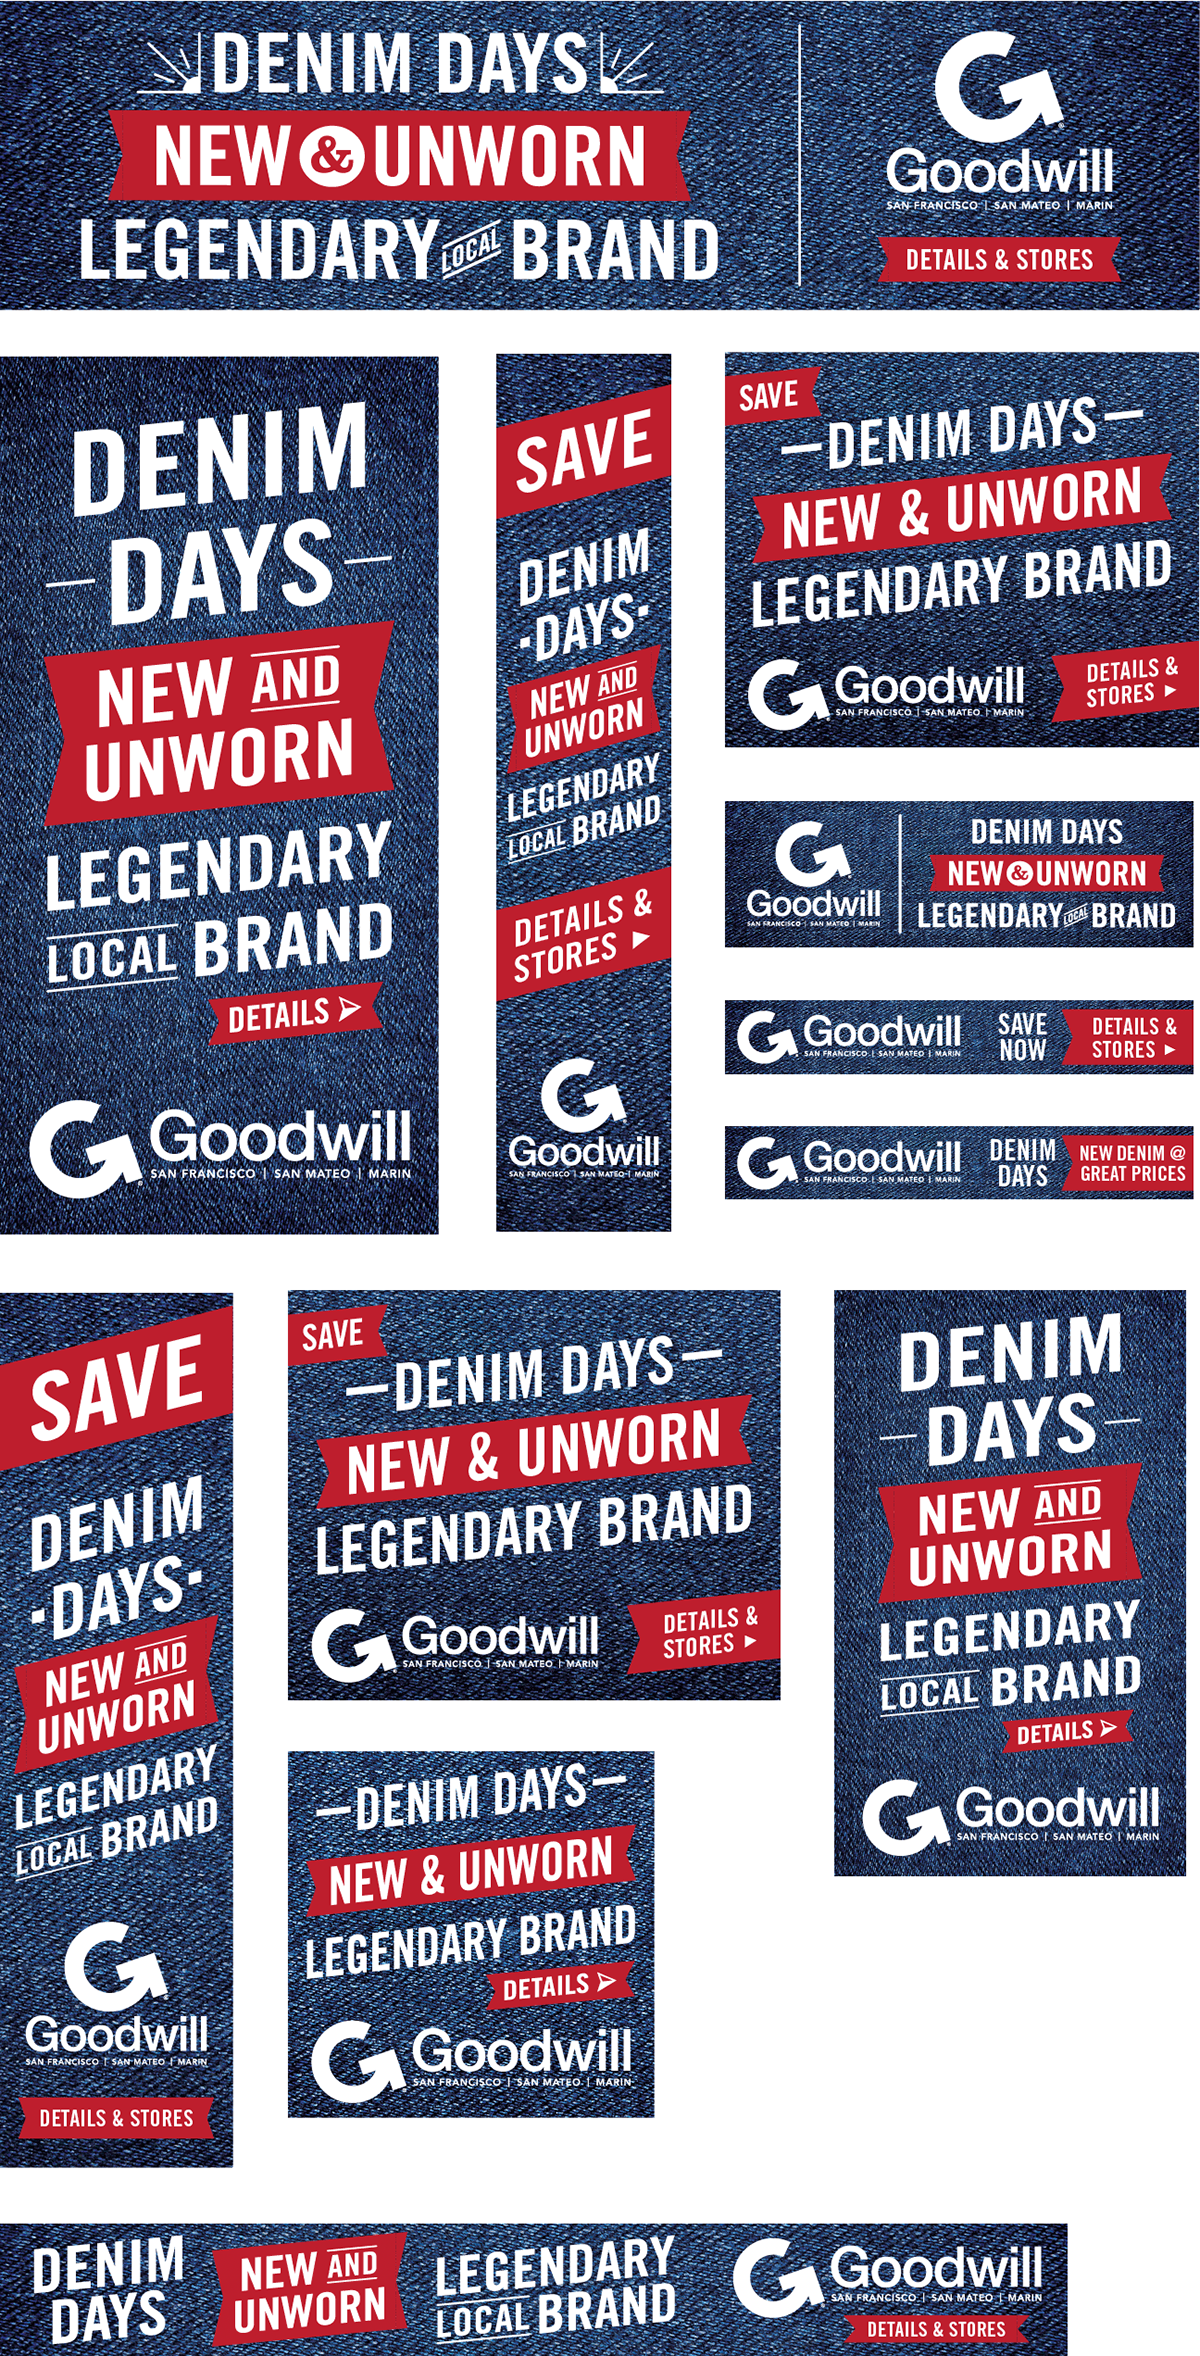 goodwill texture Trade Gothic LT Denim posters sale mobile campaign san francisco Retail